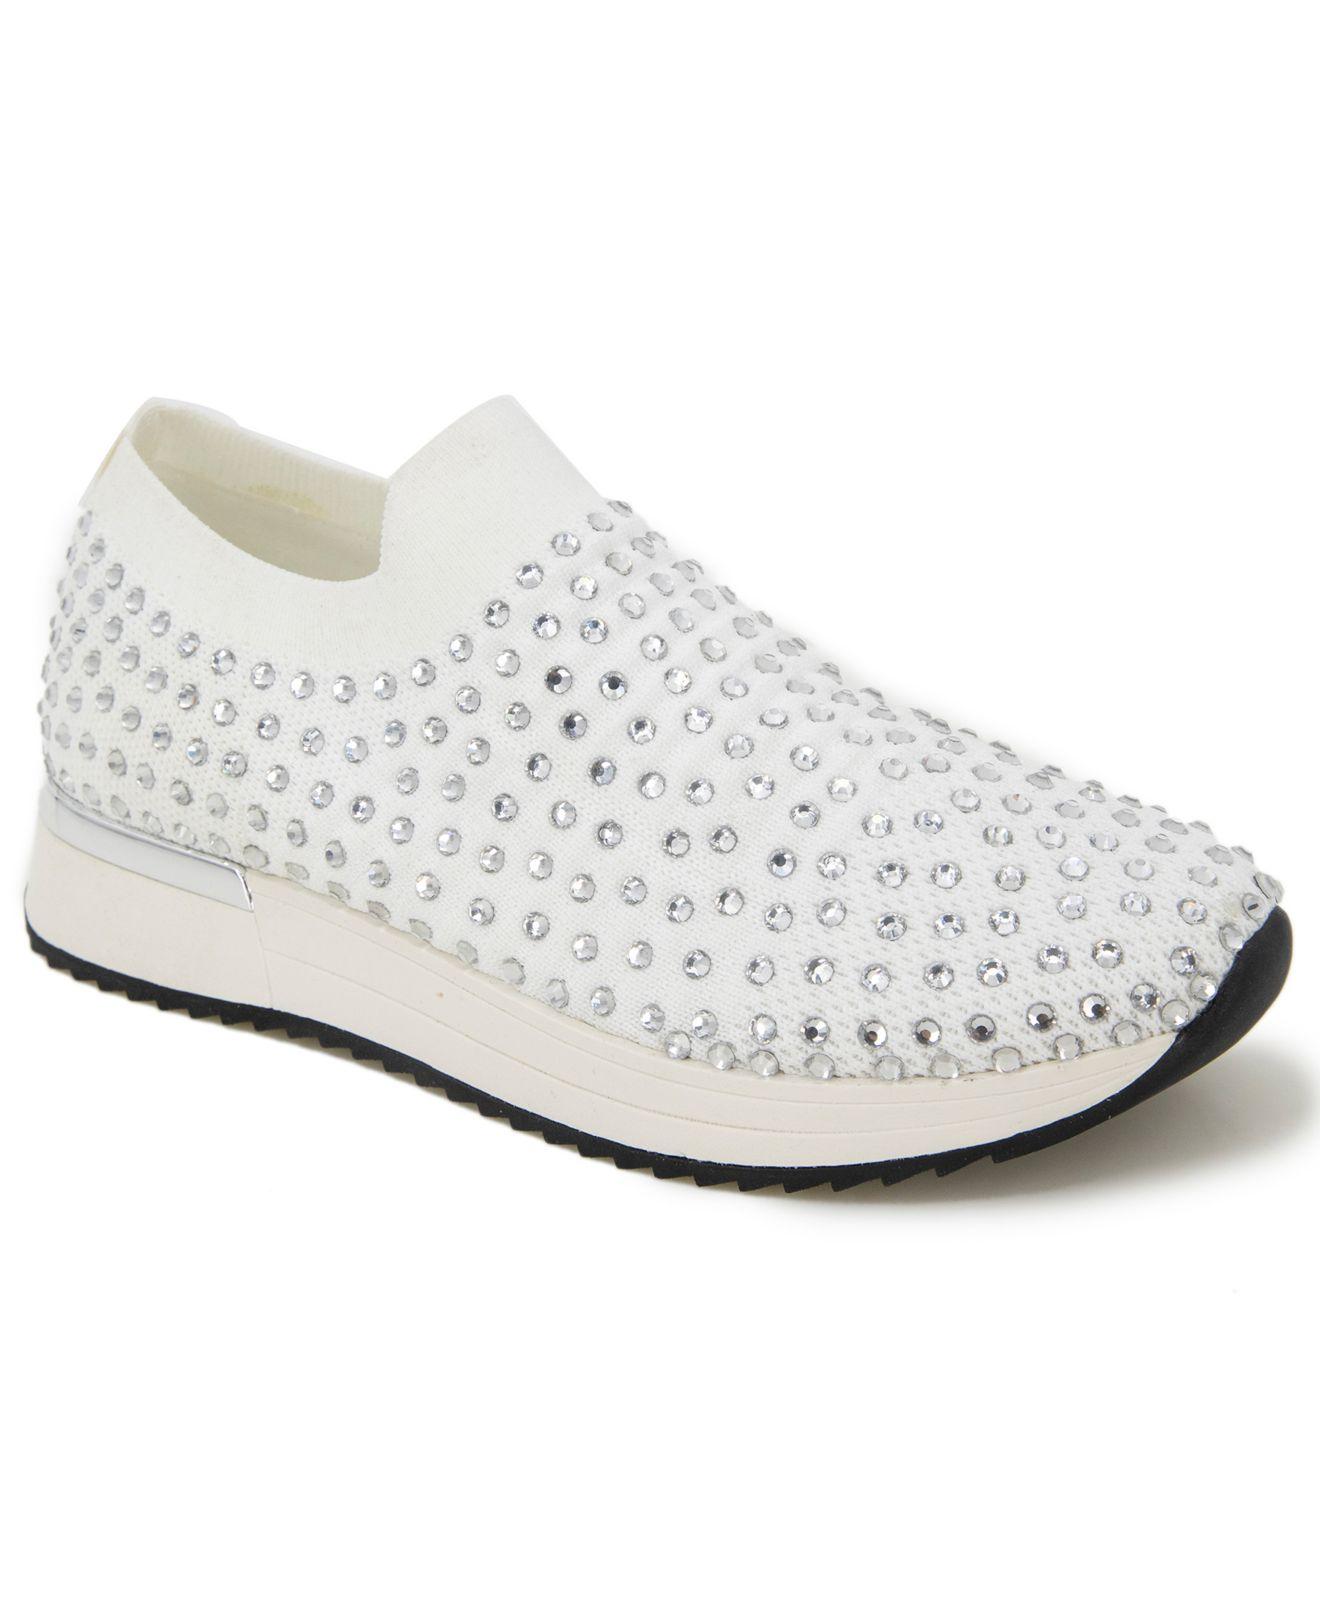 Kenneth Cole Reaction Rubber Cameron Jewel Joggers Sneakers in White | Lyst